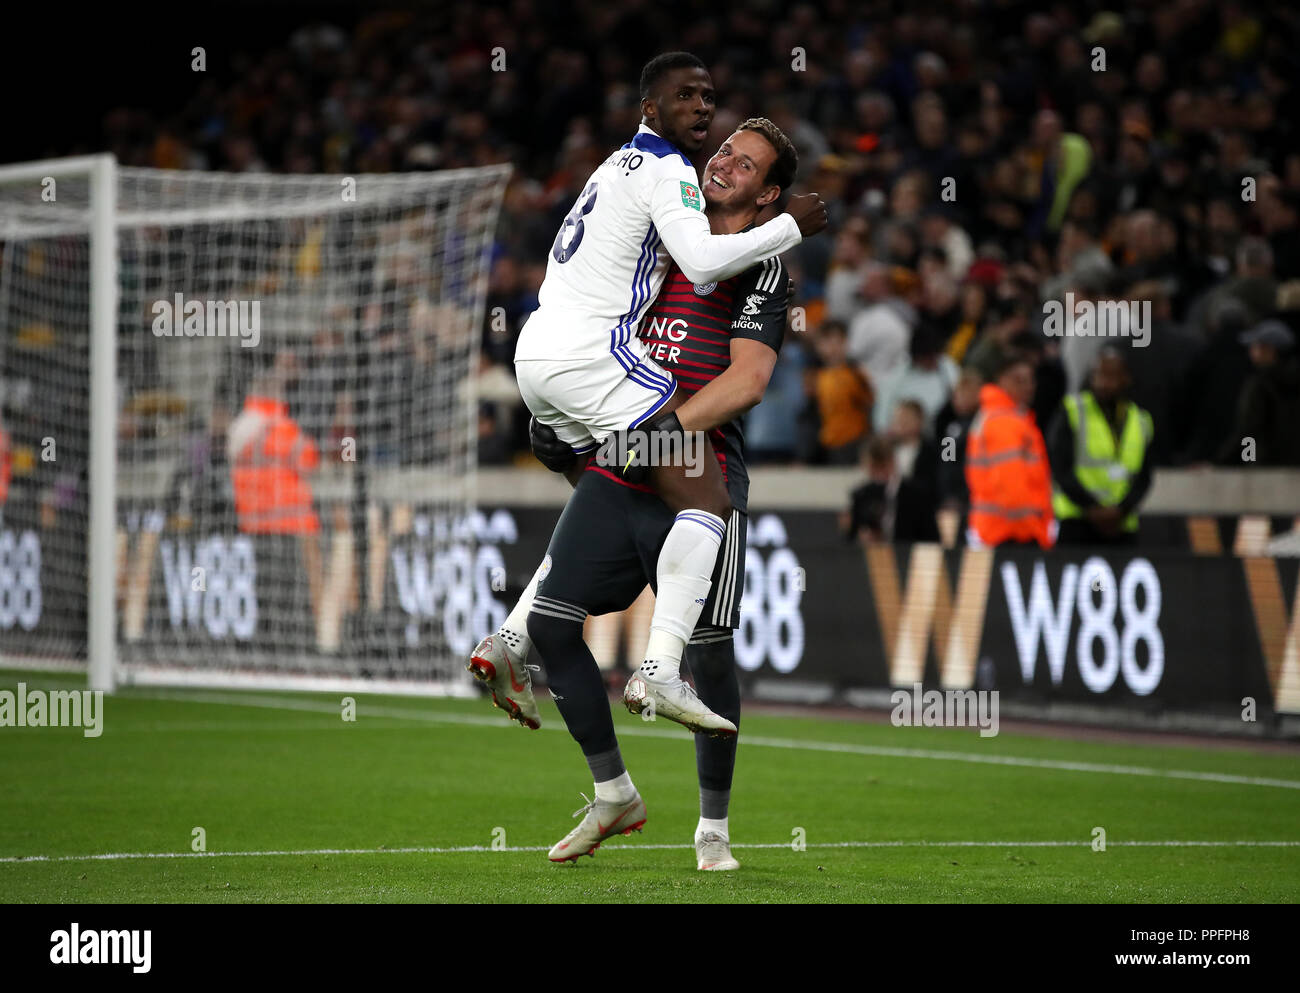 Leicester City goalkeeper Danny Ward (right) celebrates saving three penalties during the penalty shootout with team mate Kelechi Iheanacho (left) during the Carabao Cup, third round match at Molineux, Wolverhampton. PRESS ASSOCIATION Photo. Picture date: Tuesday September 25, 2018. See PA story SOCCER Wolves. Photo credit should read: Nick Potts/PA Wire. RESTRICTIONS: EDITORIAL USE ONLY No use with unauthorised audio, video, data, fixture lists, club/league logos or 'live' services. Online in-match use limited to 120 images, no video emulation. No use in betting, games or single club/league/p Stock Photo